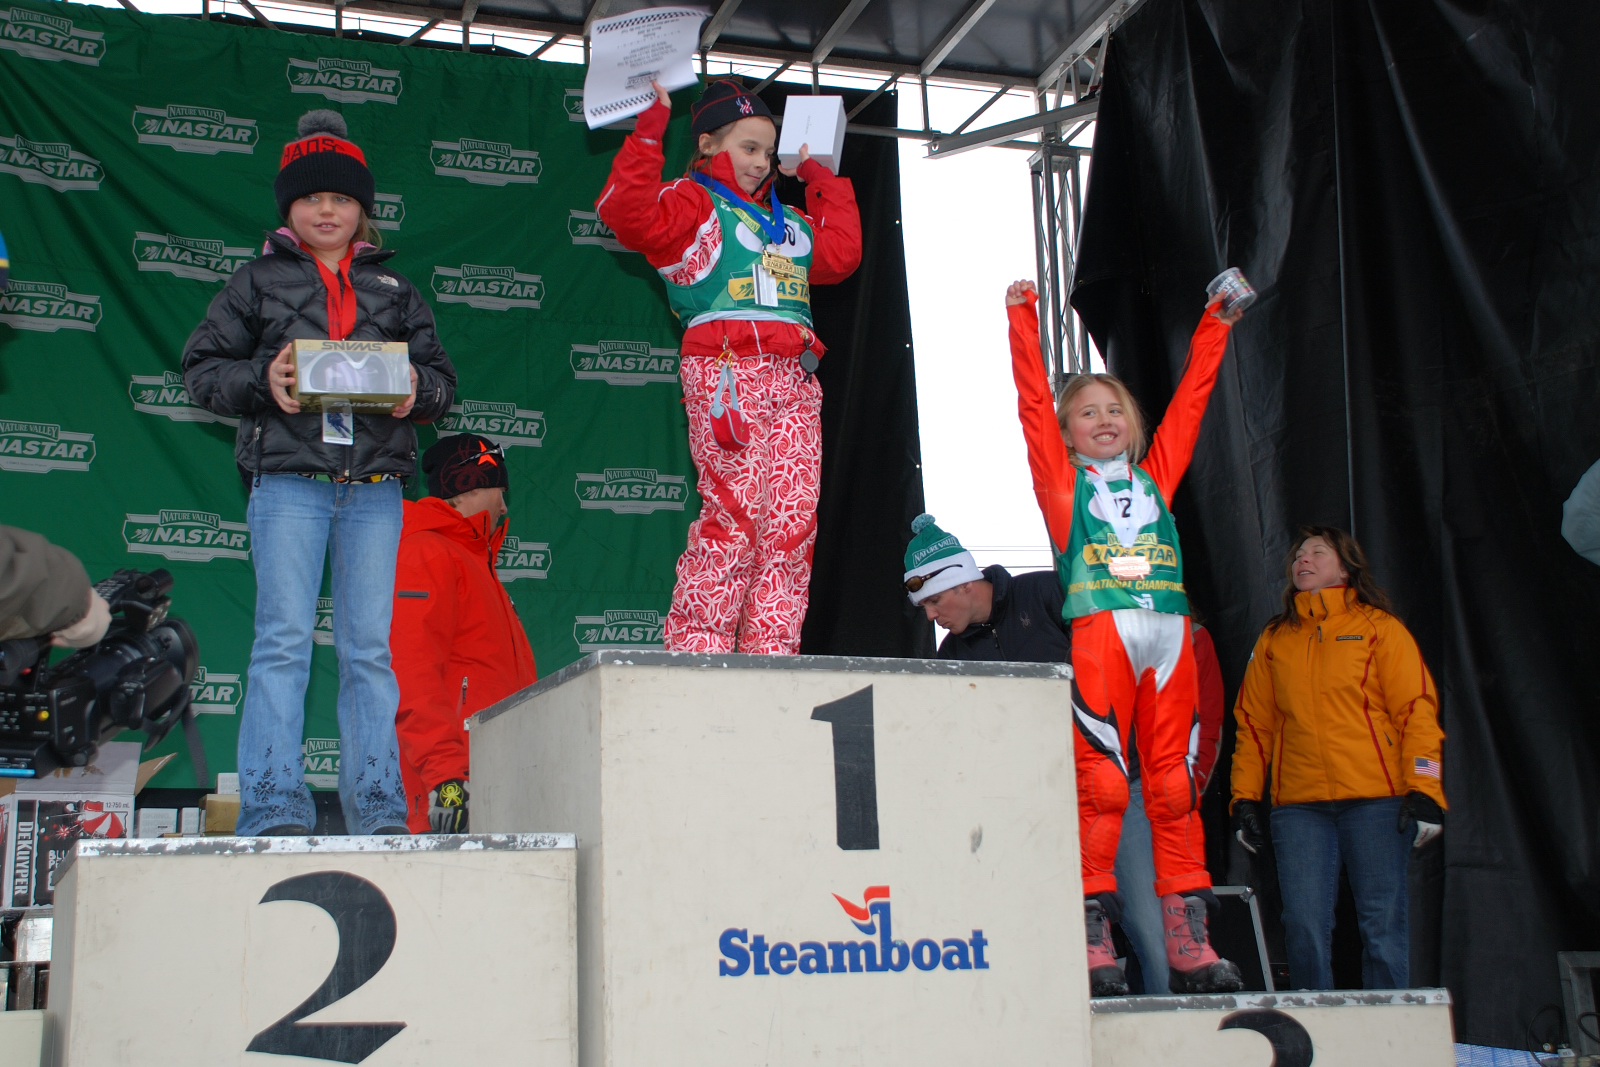 Ainsley Proffit stands on her first podium of her ski racing career. Little did she know that race would take her down a path towards joining the U.S. development team. Photo courtesy of Ainsley Proffit.